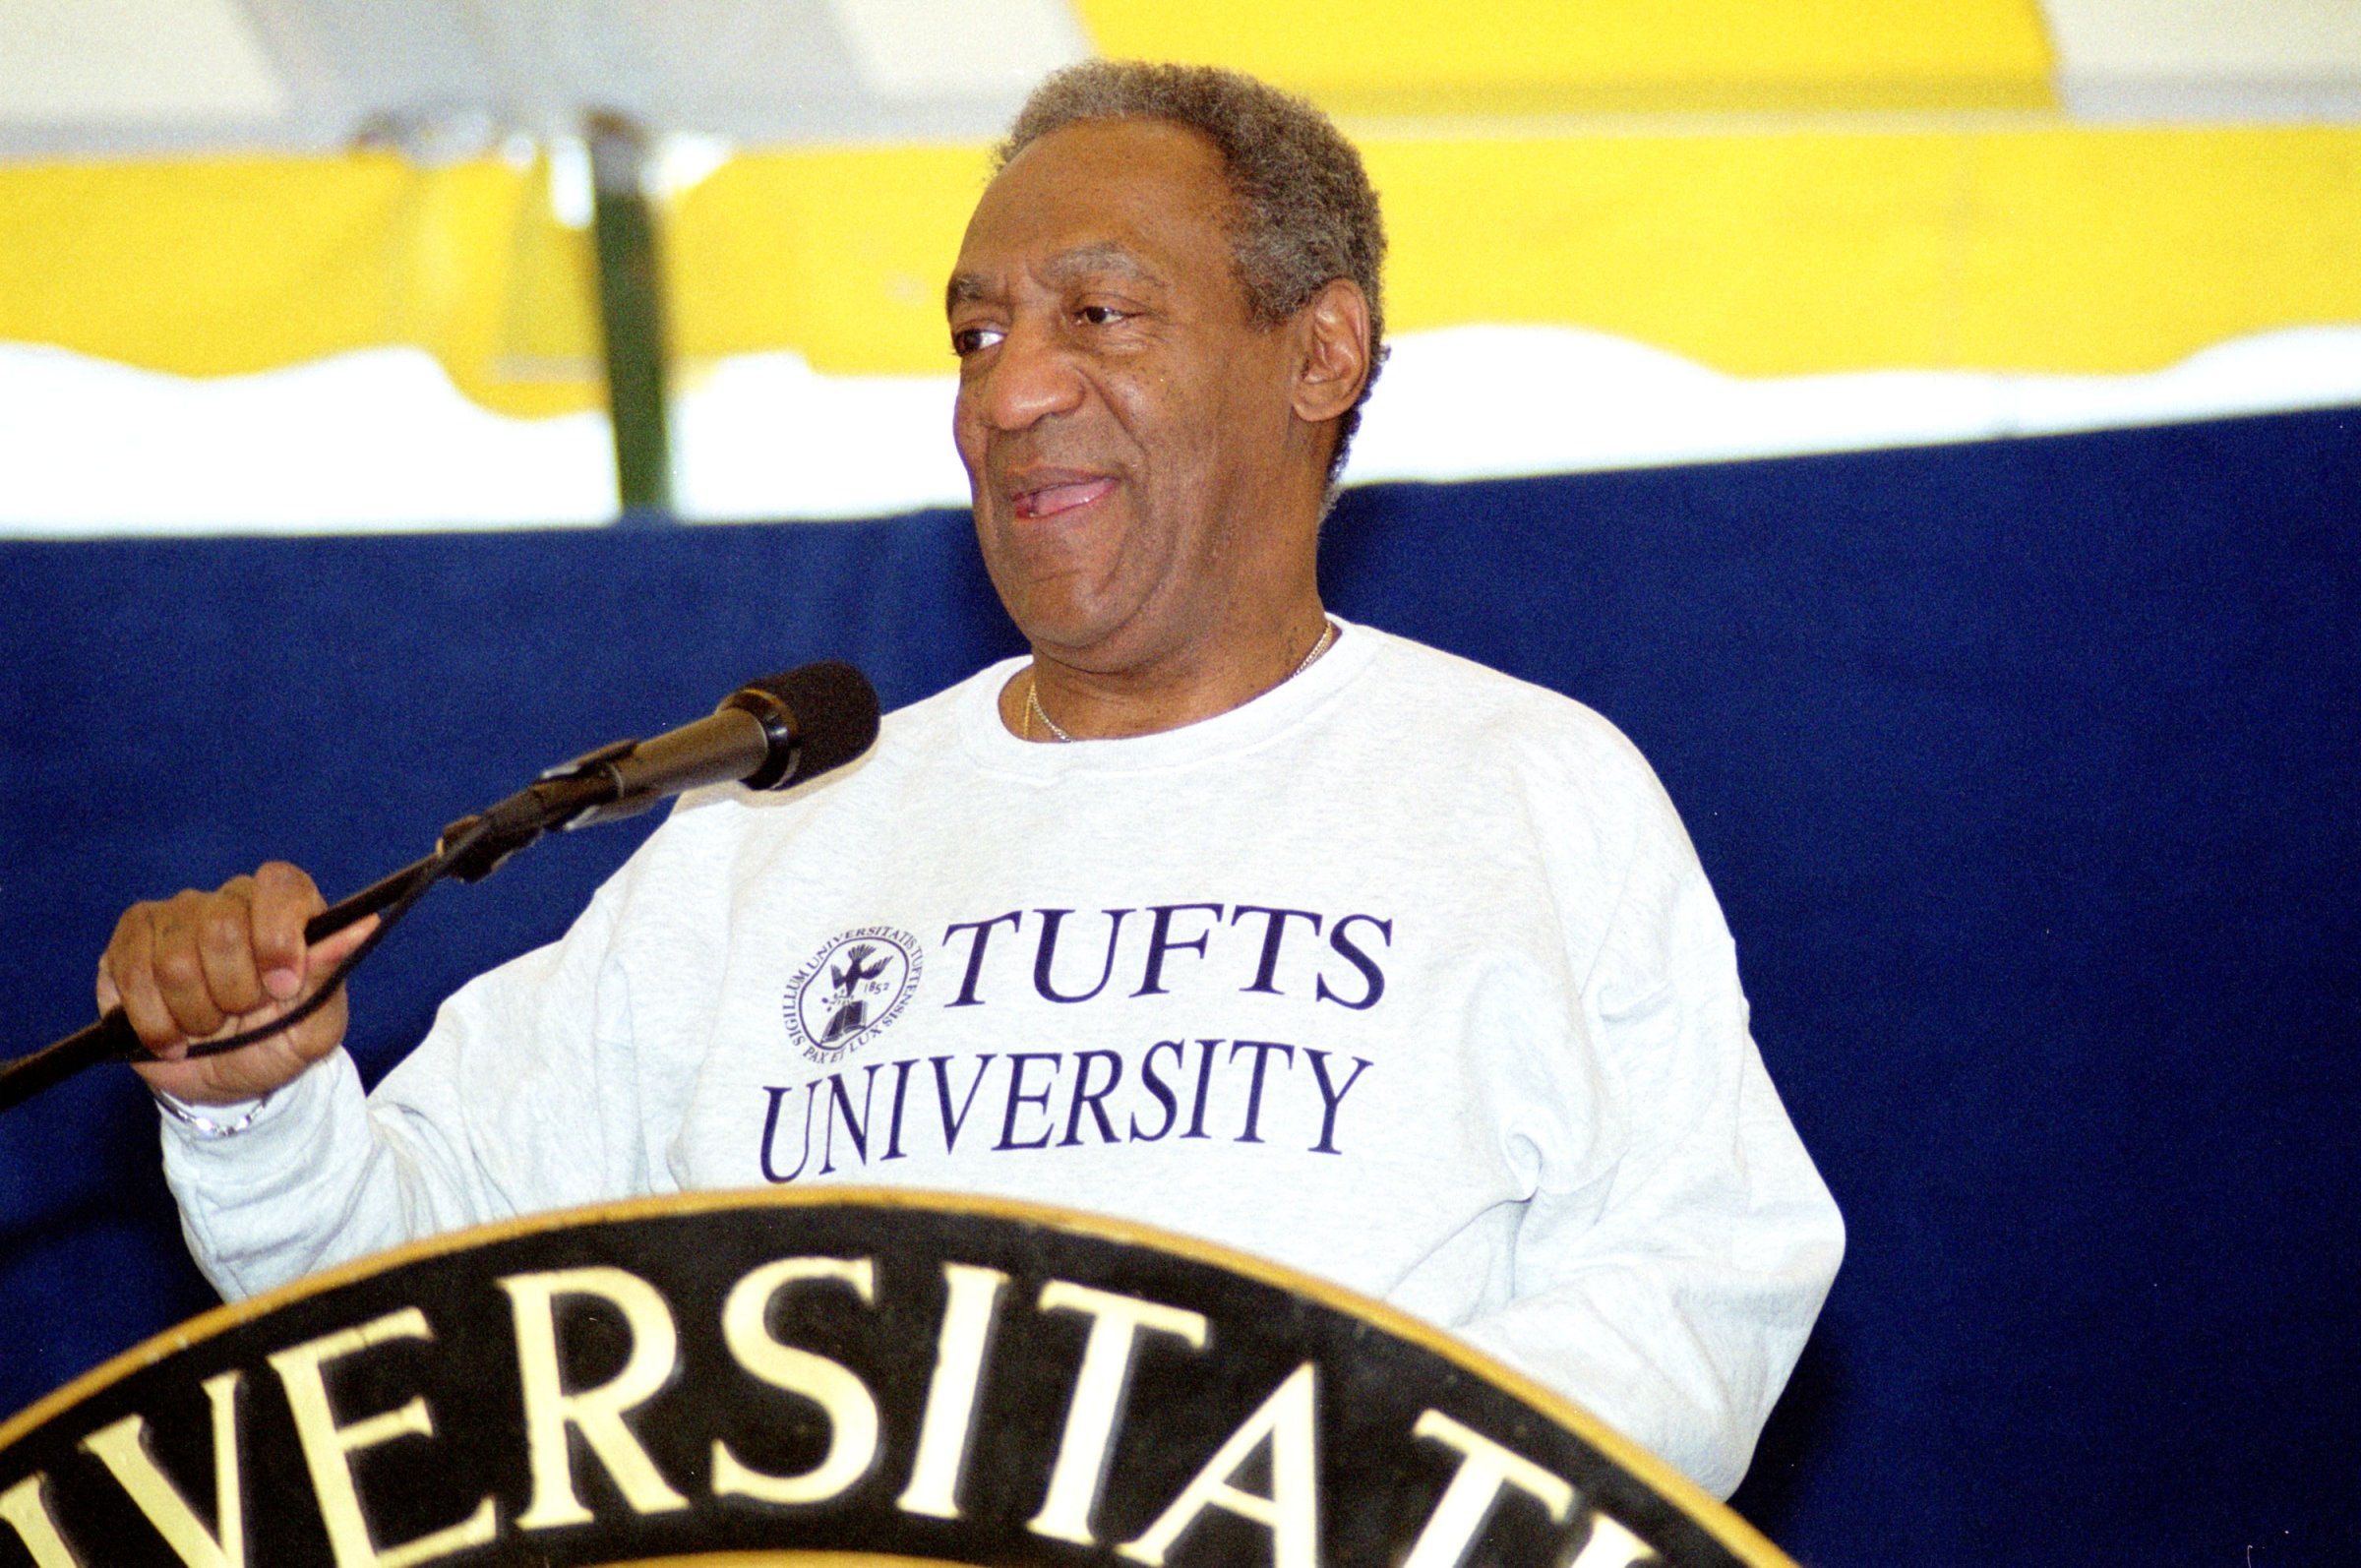 Comedian Bill Cosby speaks to graduates on May 21, 2000 after receiving an honorary degree from Tufts University in Medford, MA.